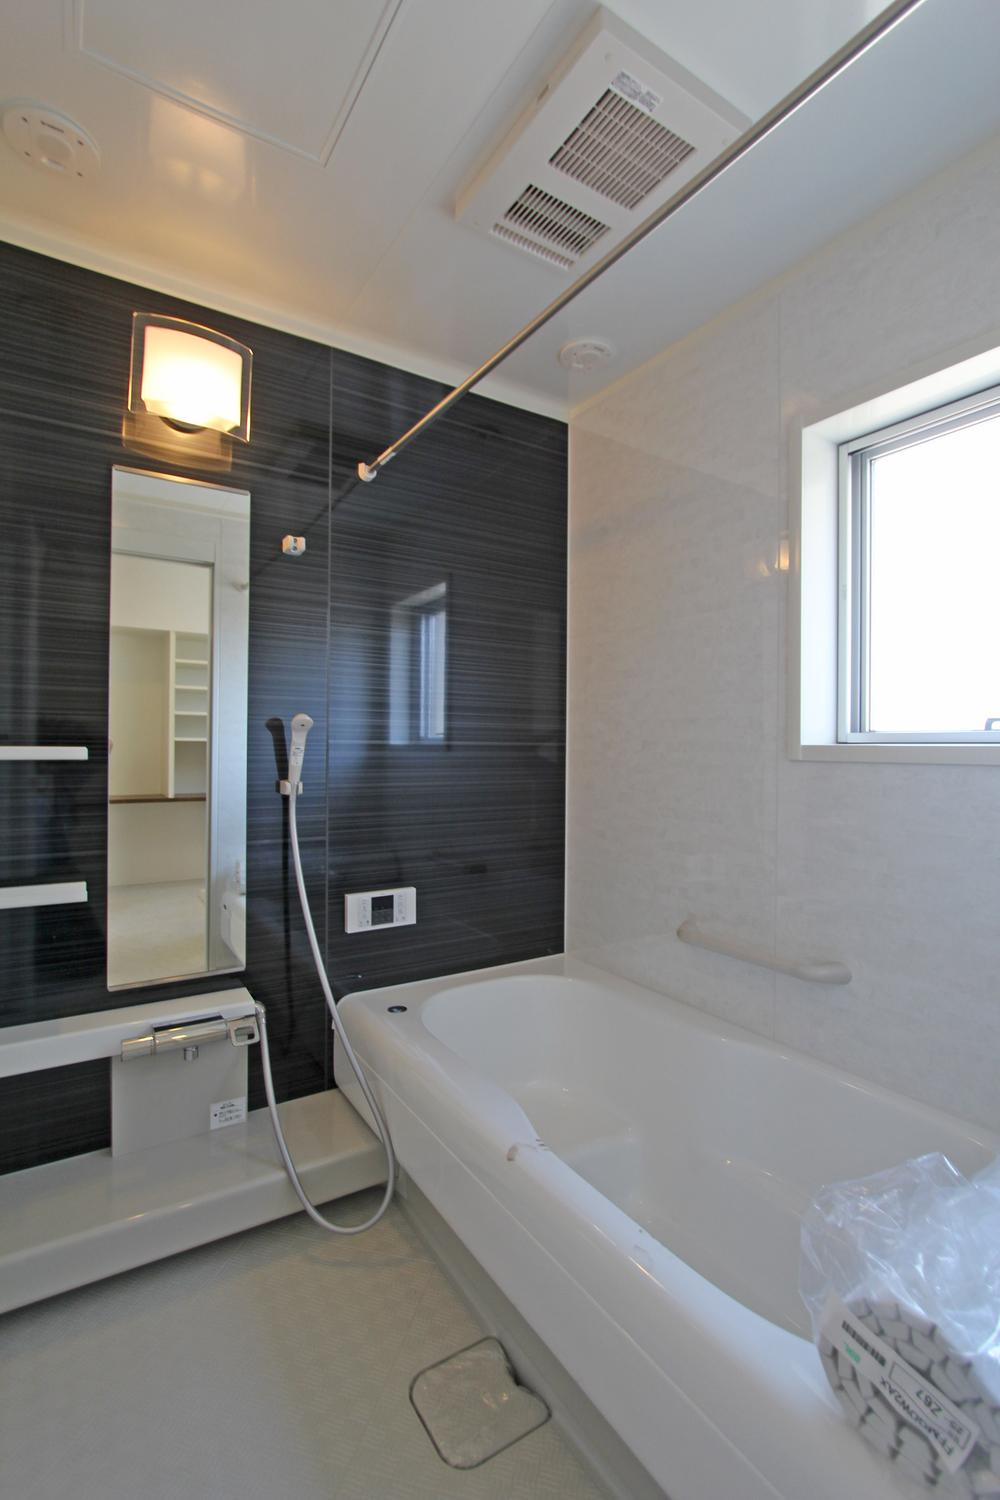 Same specifications photo (bathroom). Interior construction results